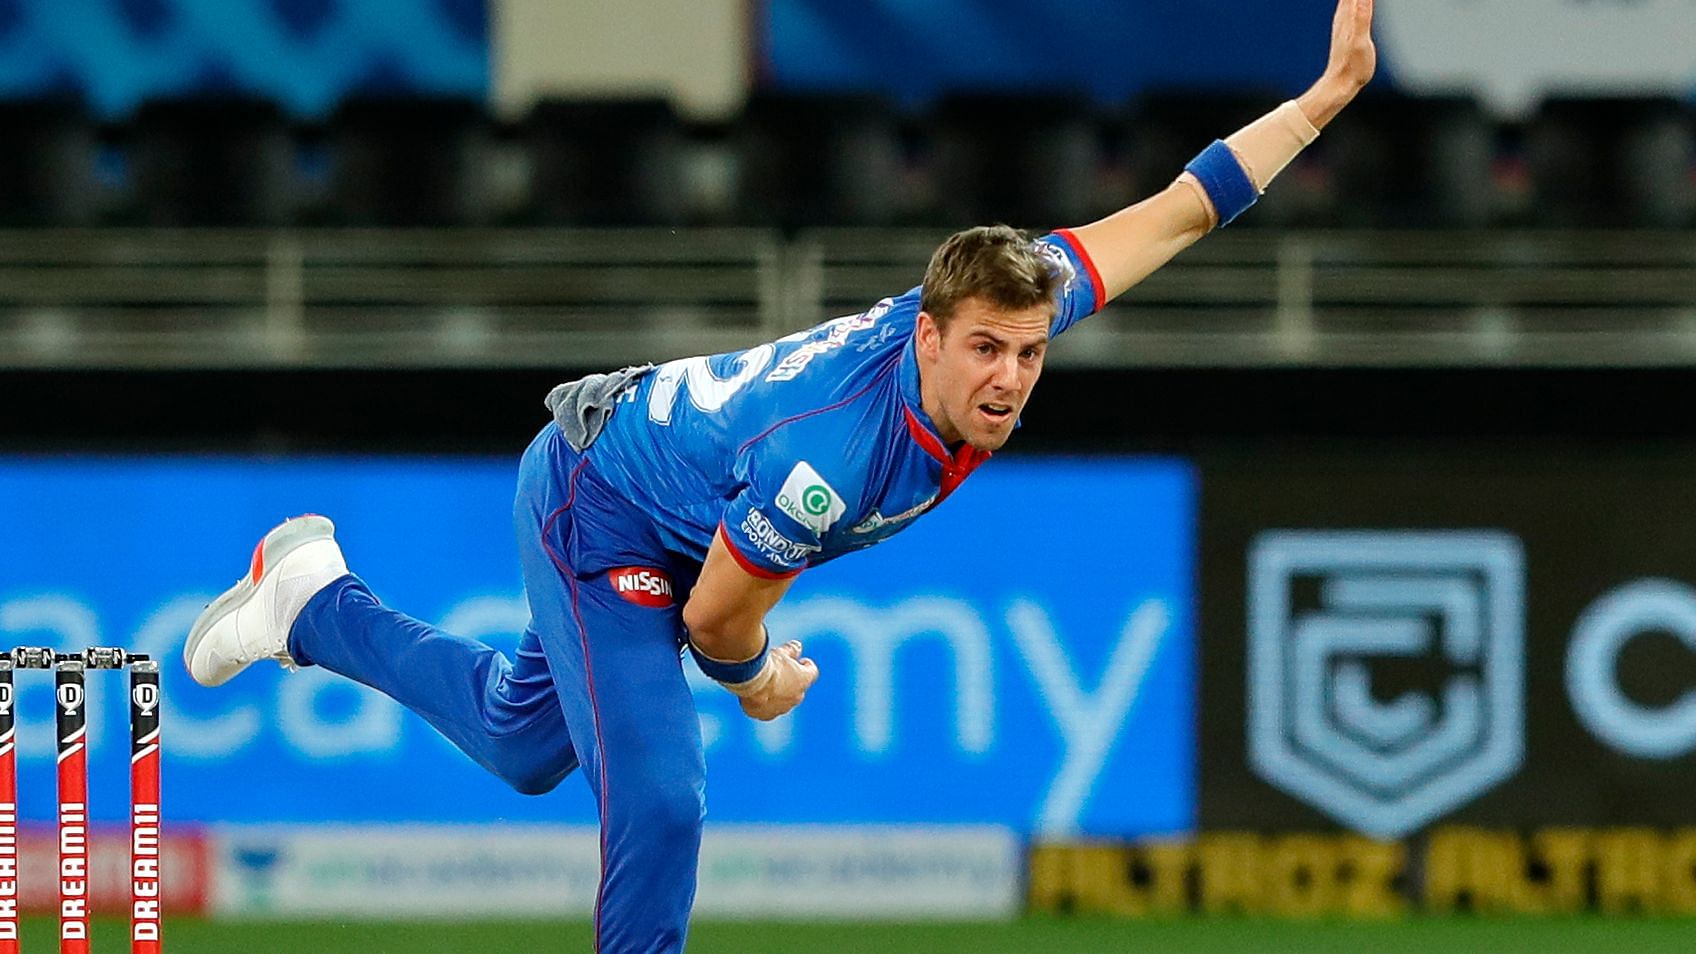 Delhi Capitals (DC) fast bowler Anrich Nortje smashed Dale Steyn’s 8-year record for he fastest delivery in IPL history.